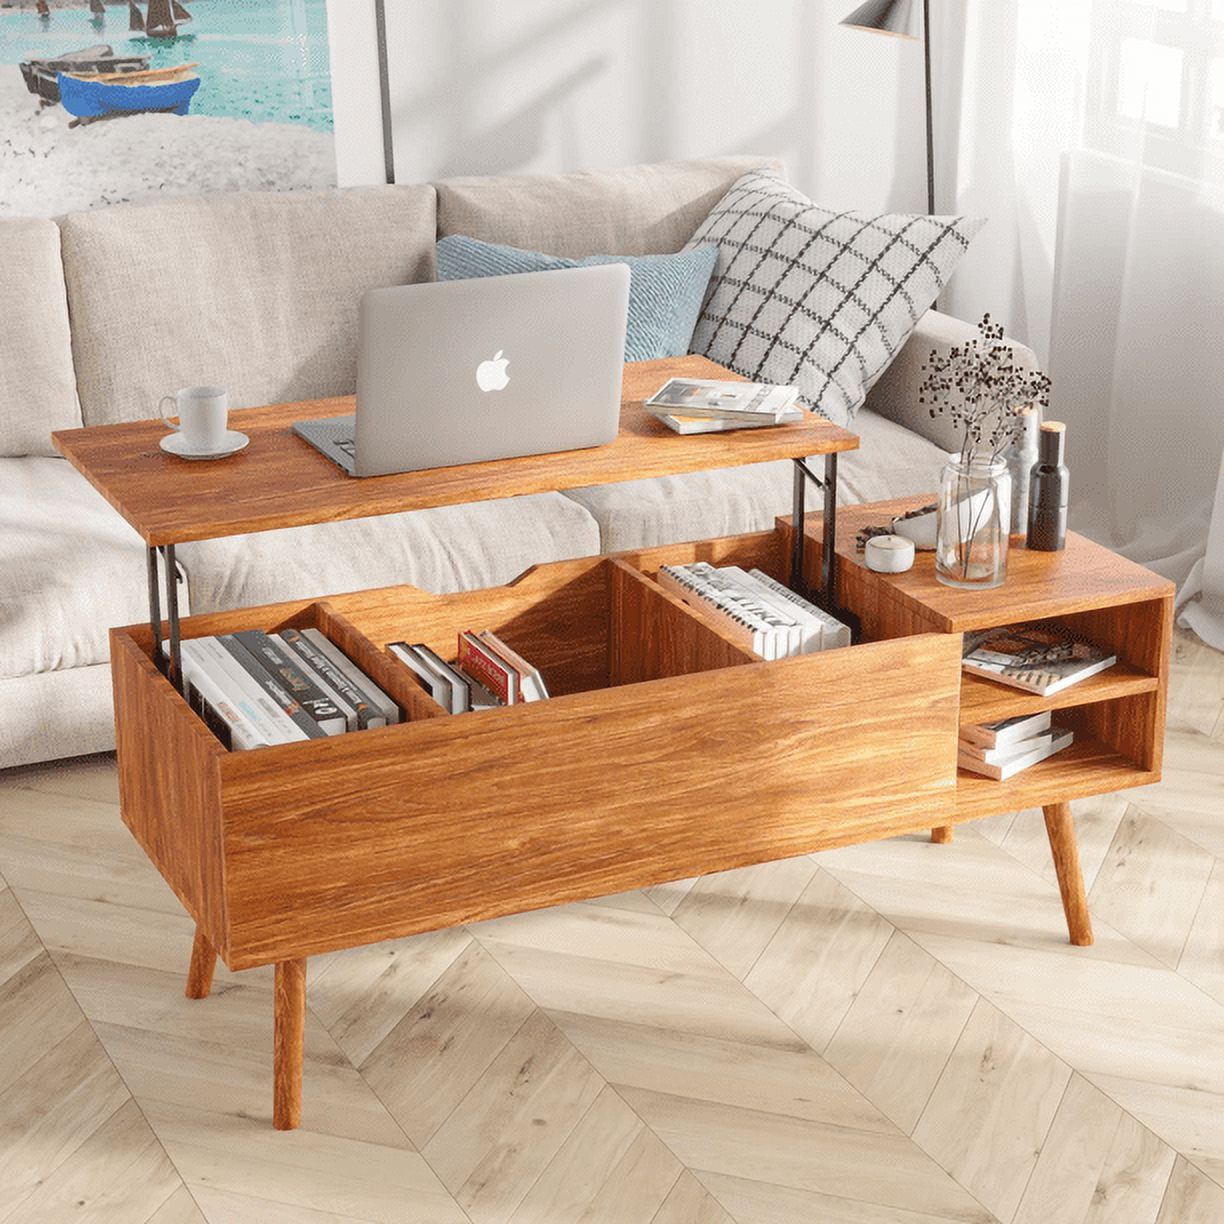 Modern Lift Top Coffee Table With Hidden Compartment Storage,Adjustable Wood  Table For Living Room,Brown – Walmart Pertaining To Modern Wooden Lift Top Tables (View 2 of 15)